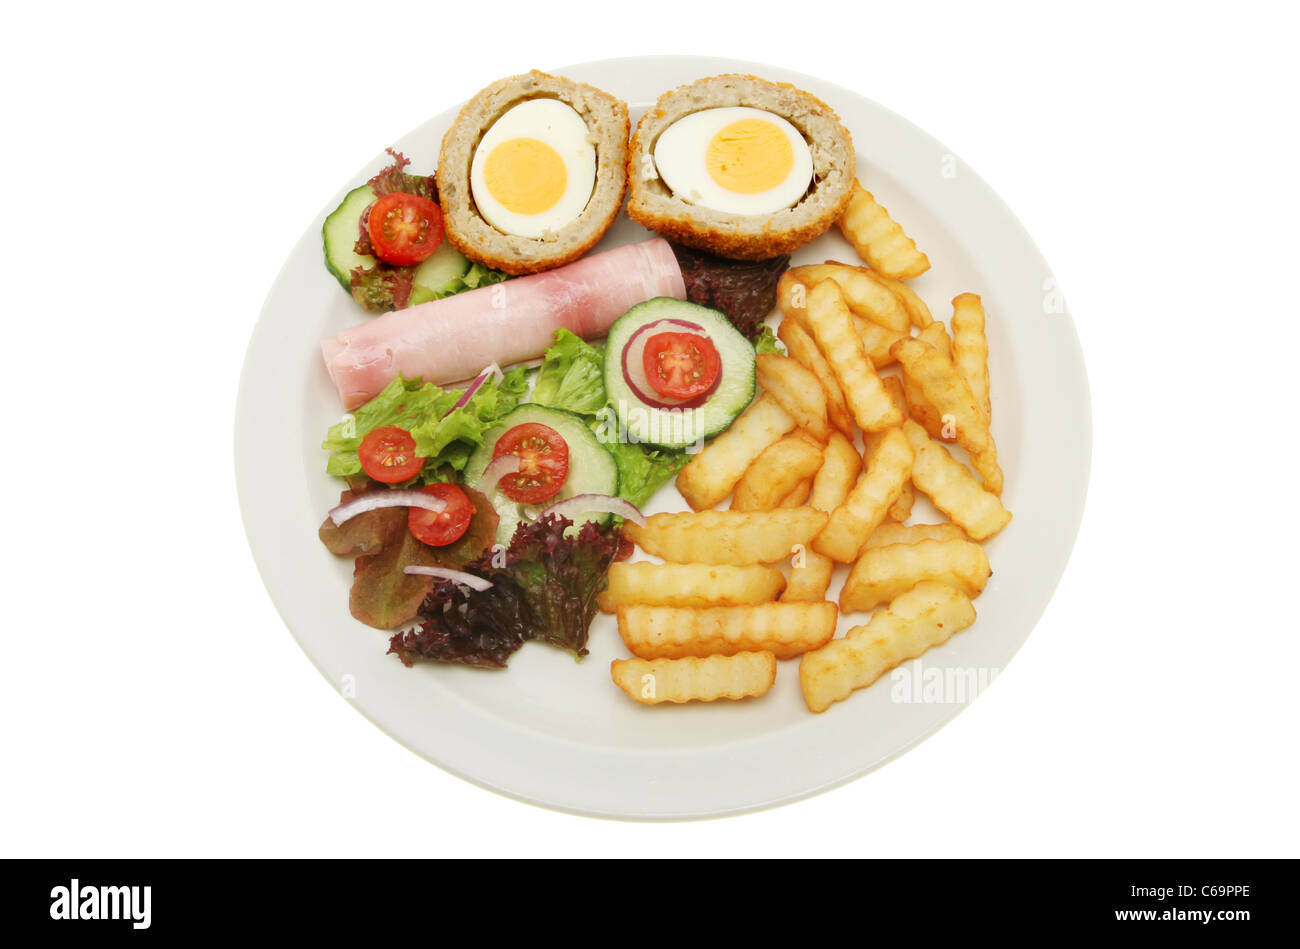 Scotch egg and ham salad with chips on a plate isolated against white Stock Photo